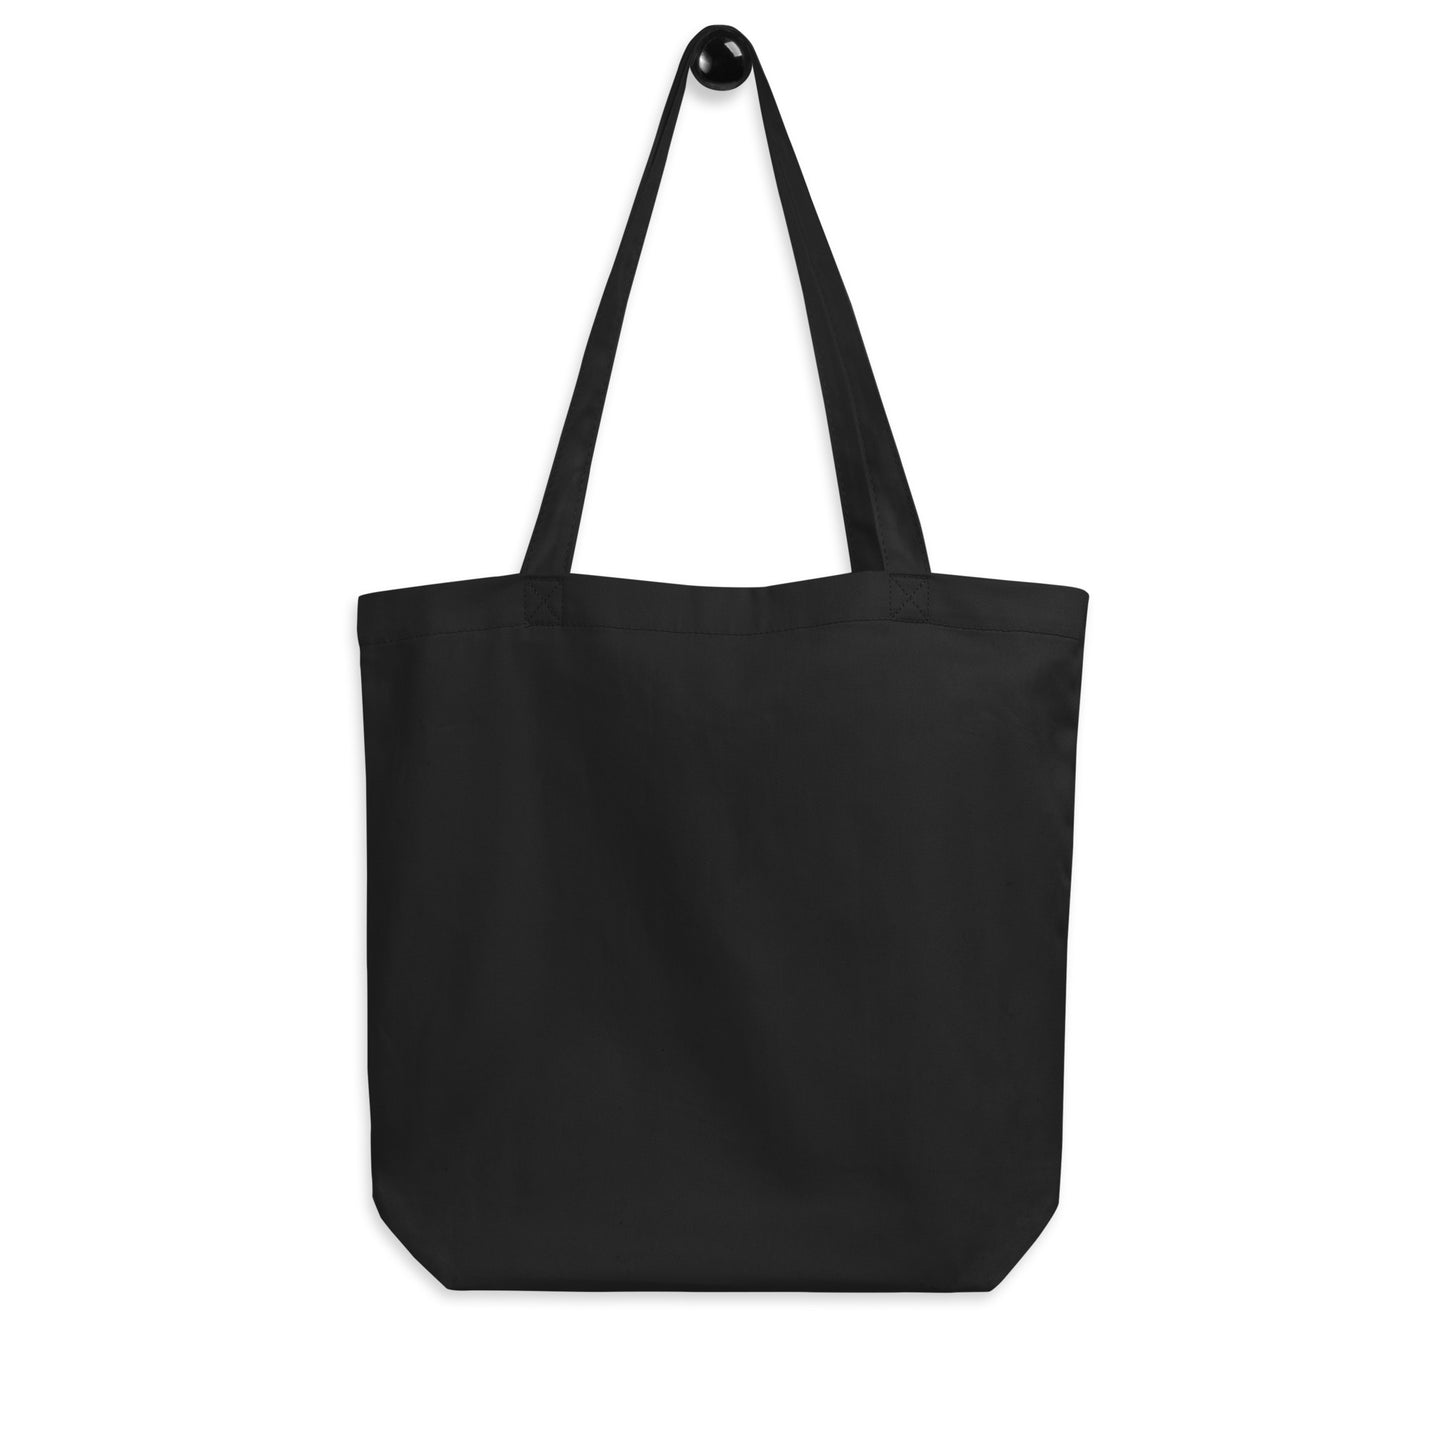 Don't Mess With Mama | Eco Tote Bag | Small